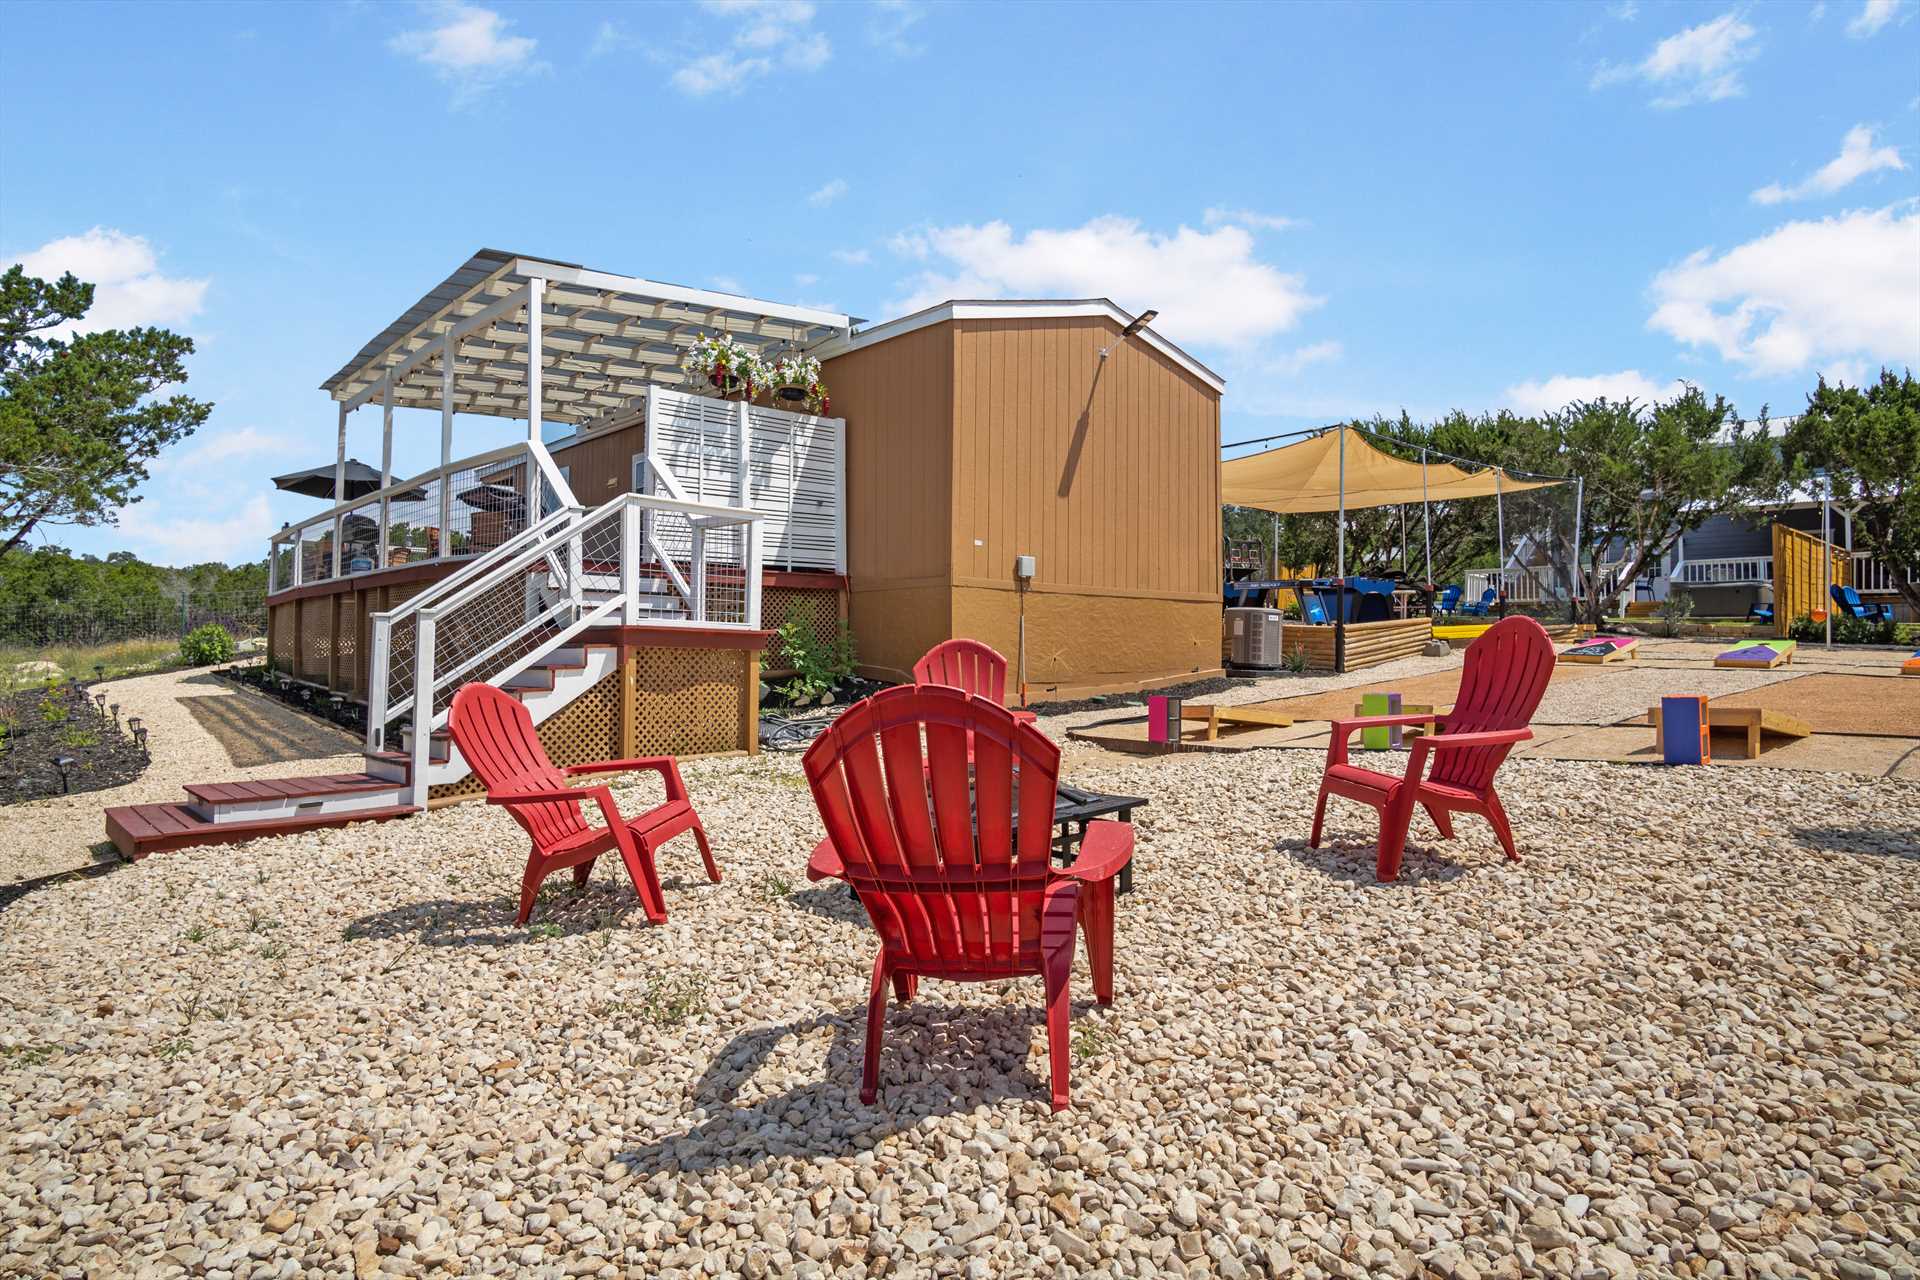                                                 Access to the fire pit and outdoor gaming area is literally right next door to Hill Country Memories!